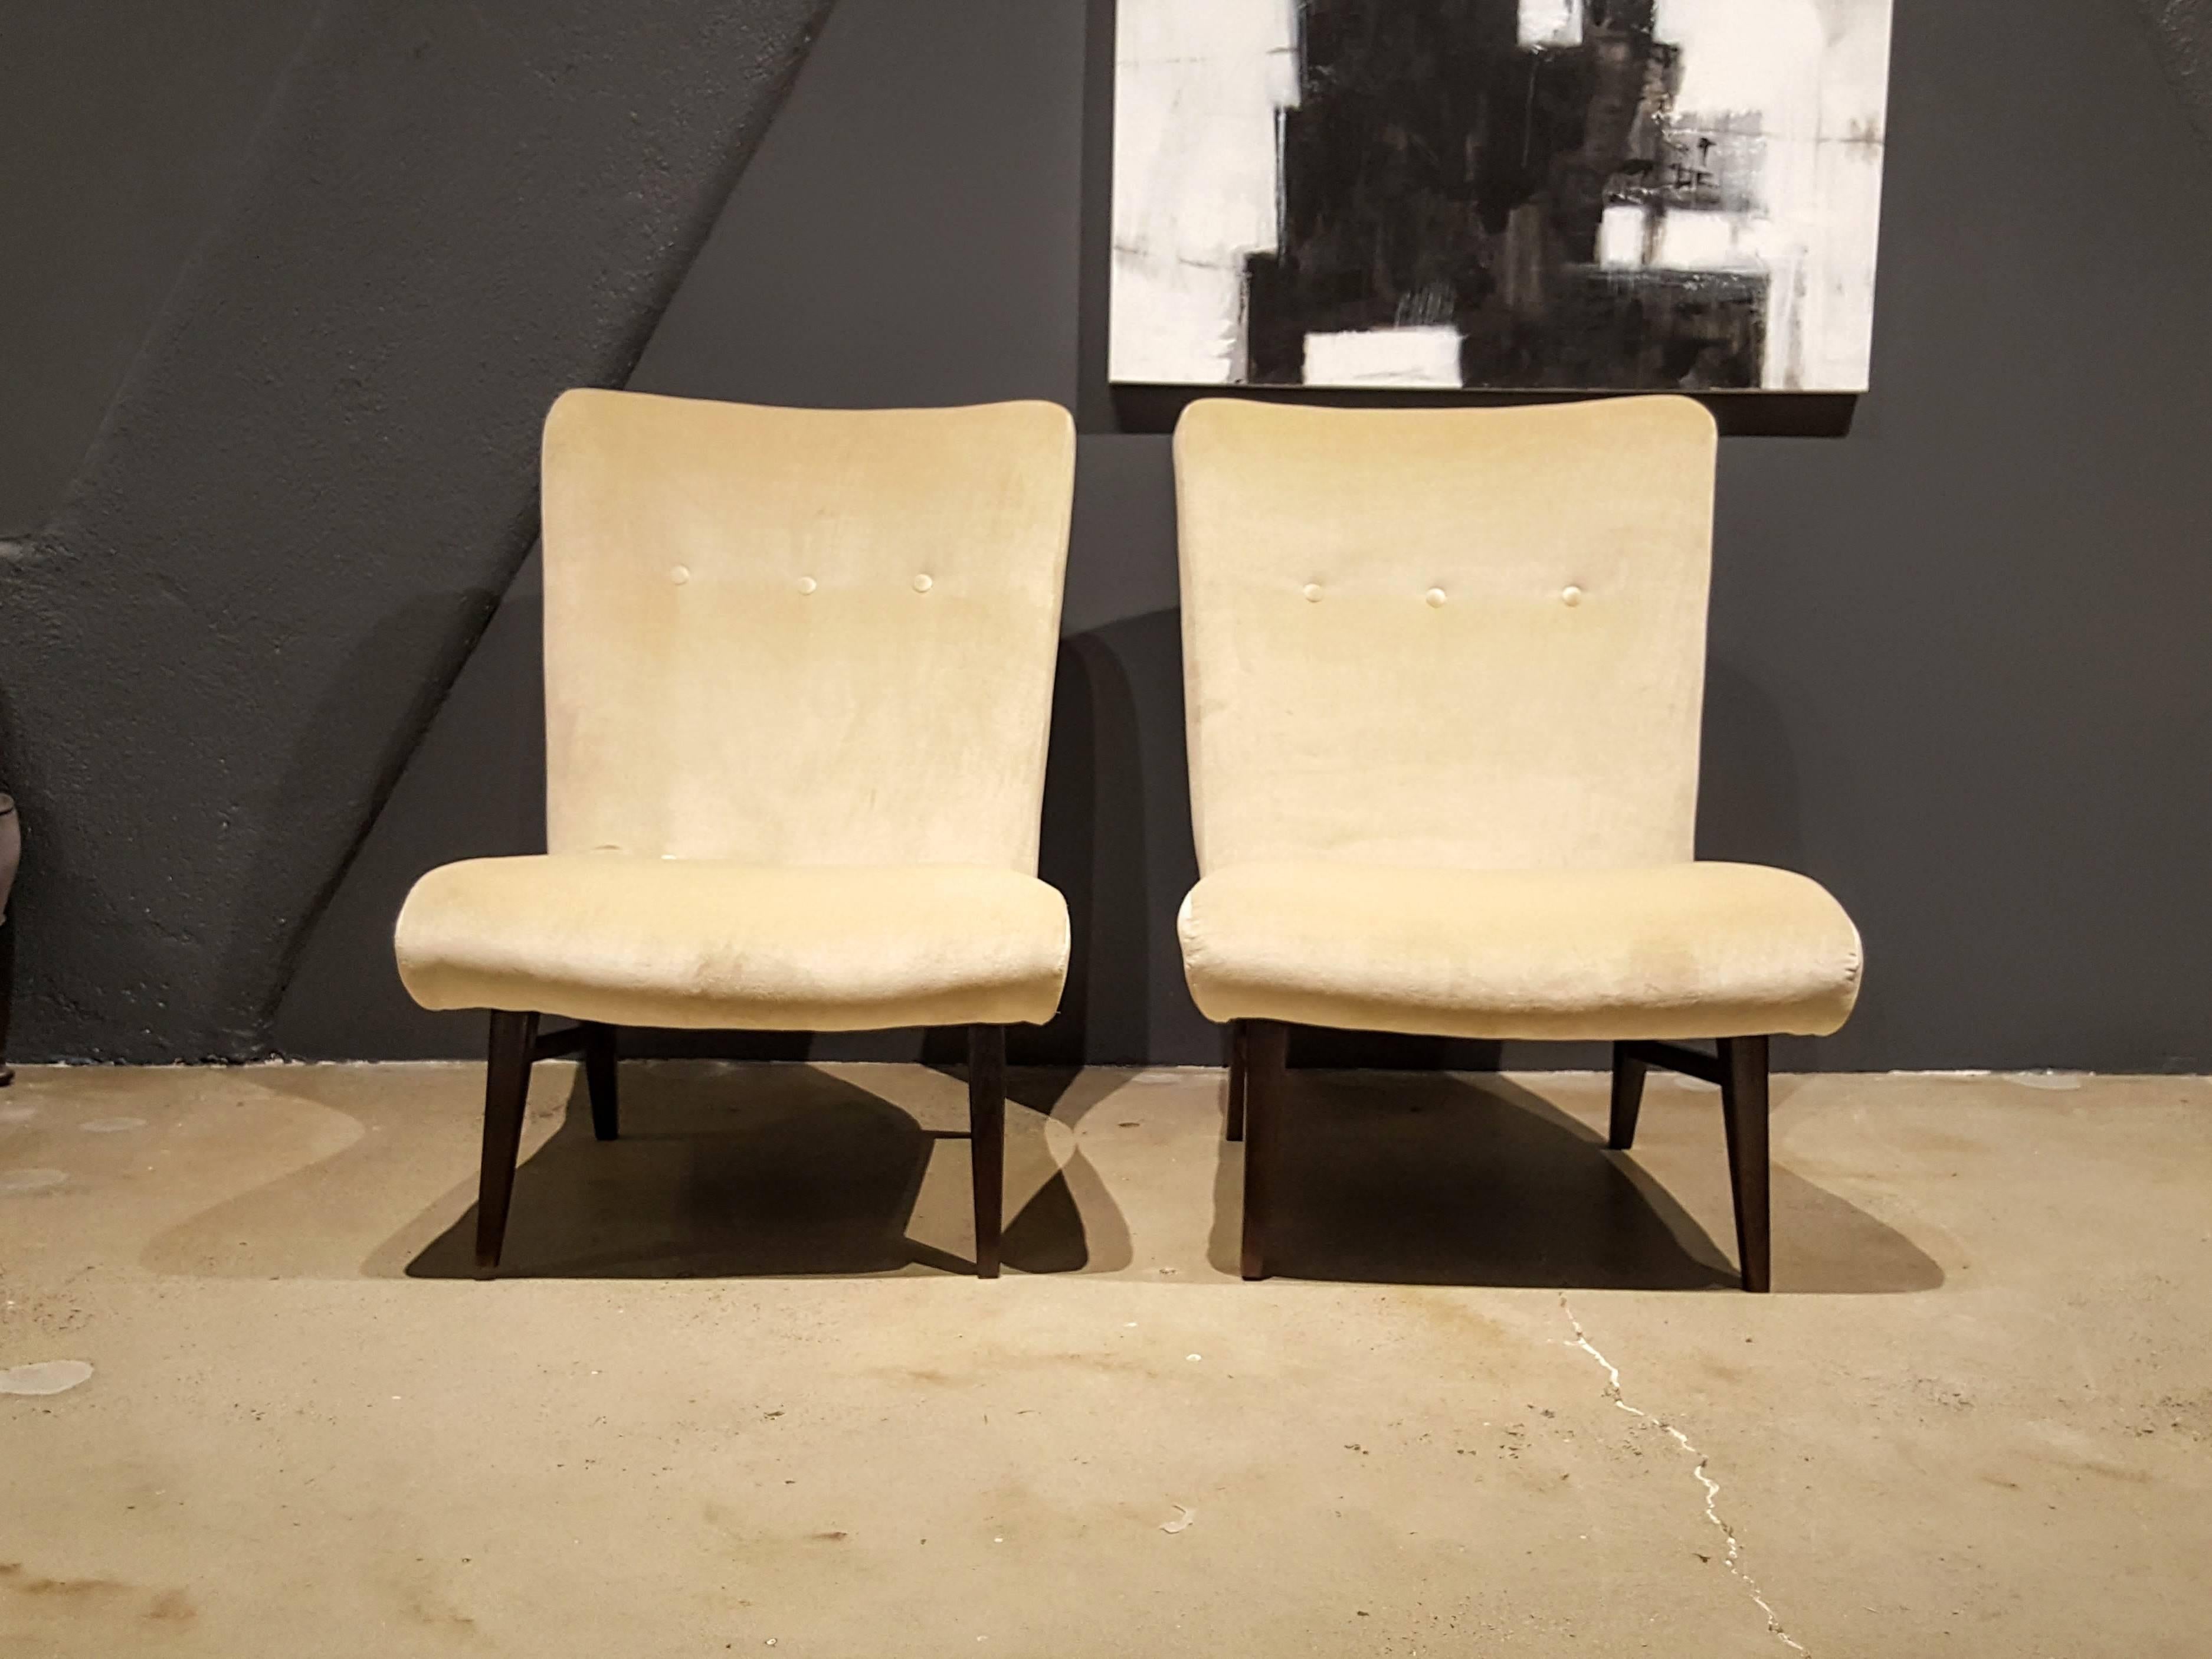 Mid-20th Century Sculptural Swedish Slipper Chairs in a Creamy Buff Velvet, 1950s